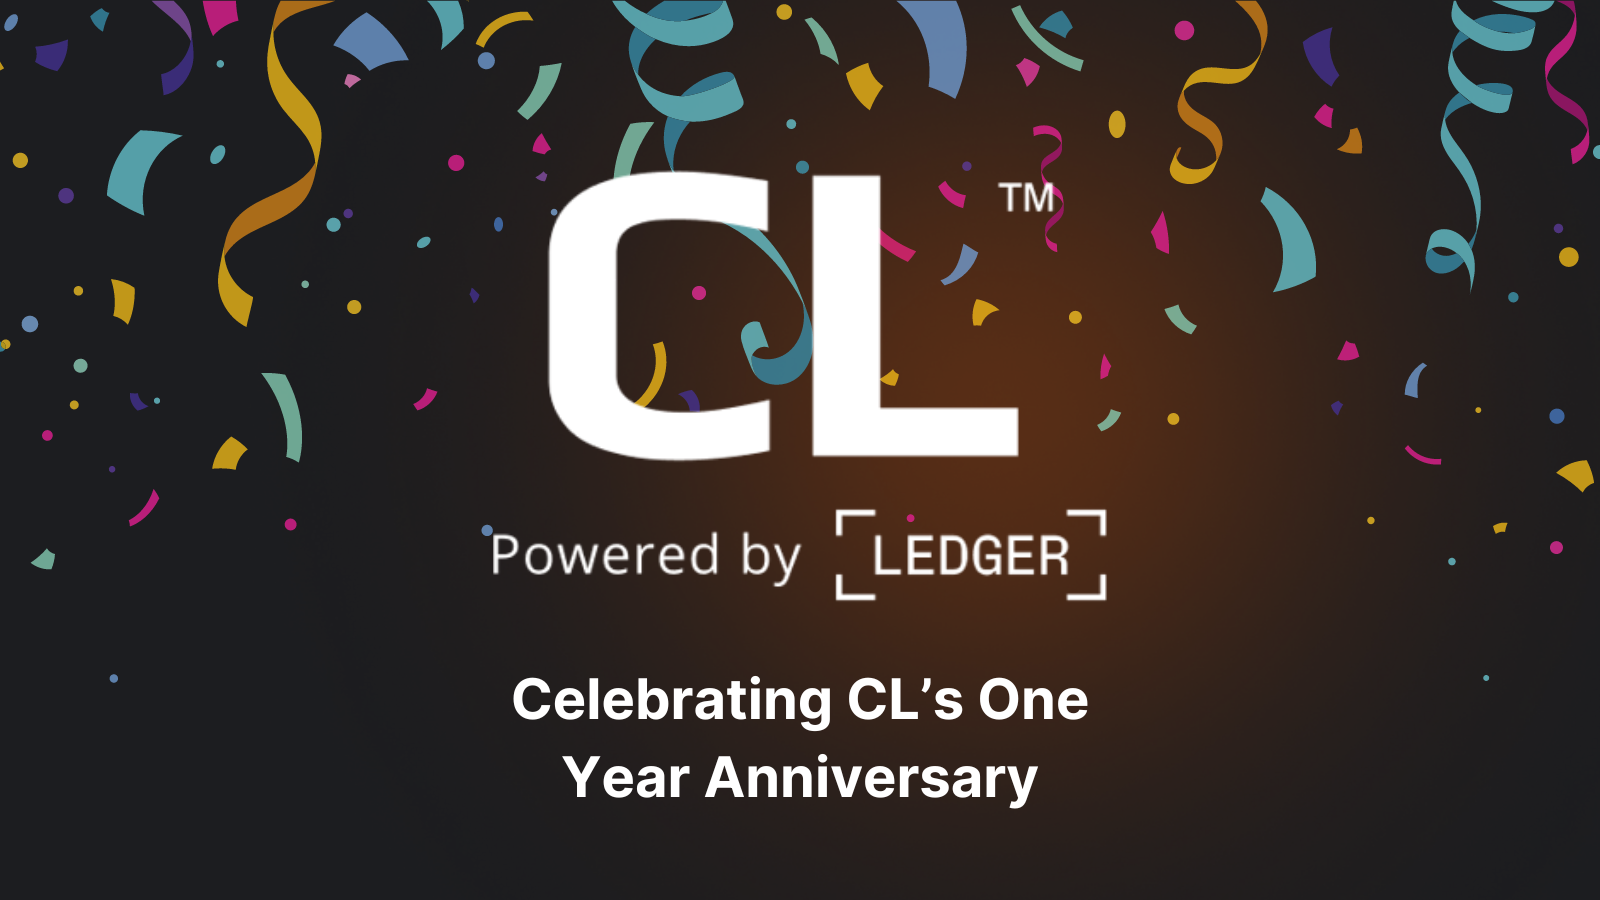 Celebrating CL’s One Year Anniversary